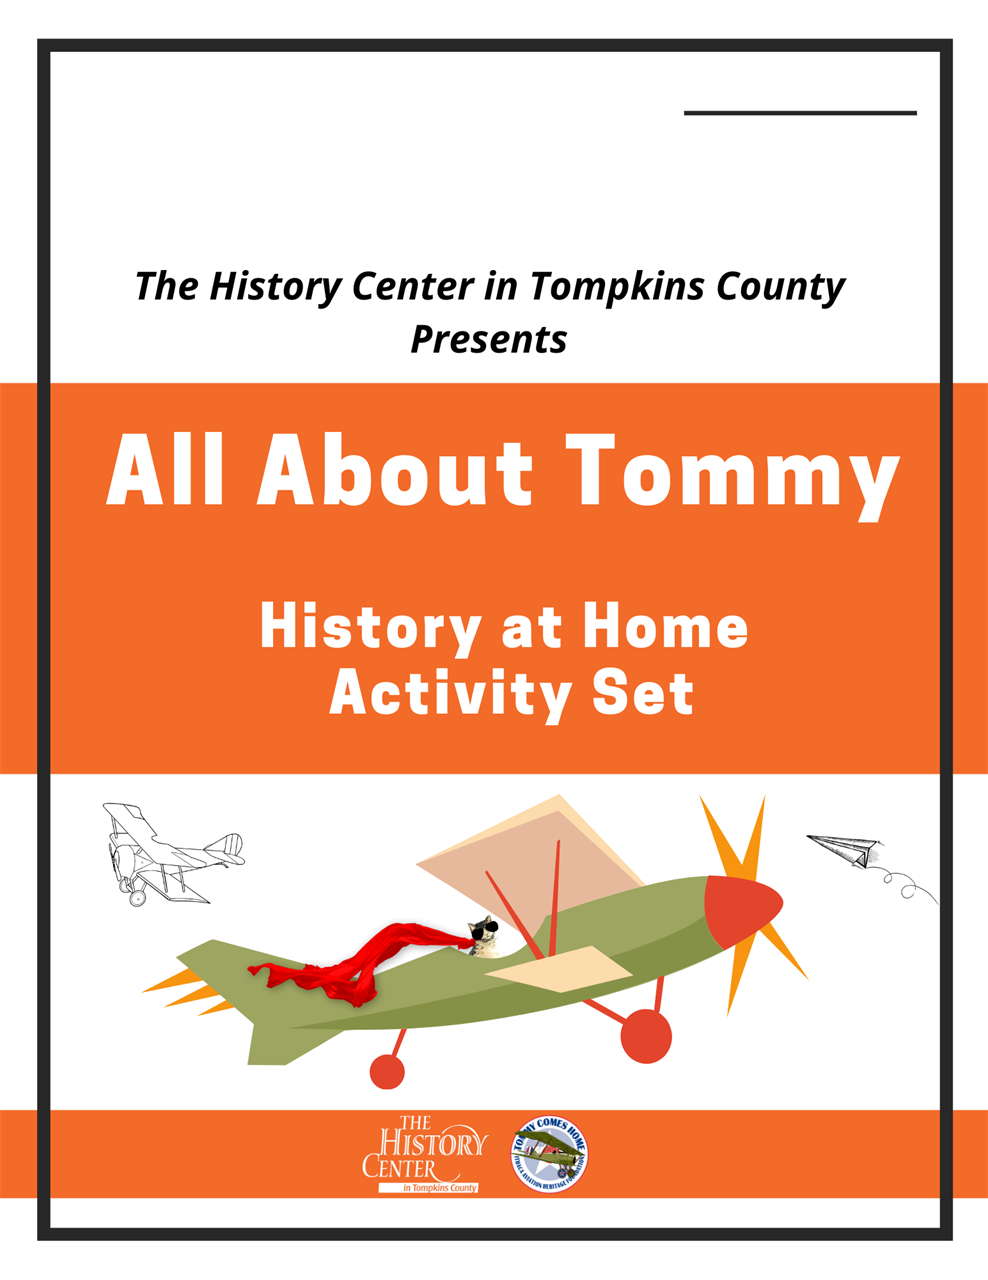 A rectangular image that says "The History Center in Tompkins Count Presents All About Tommy History At Home Activity Set"